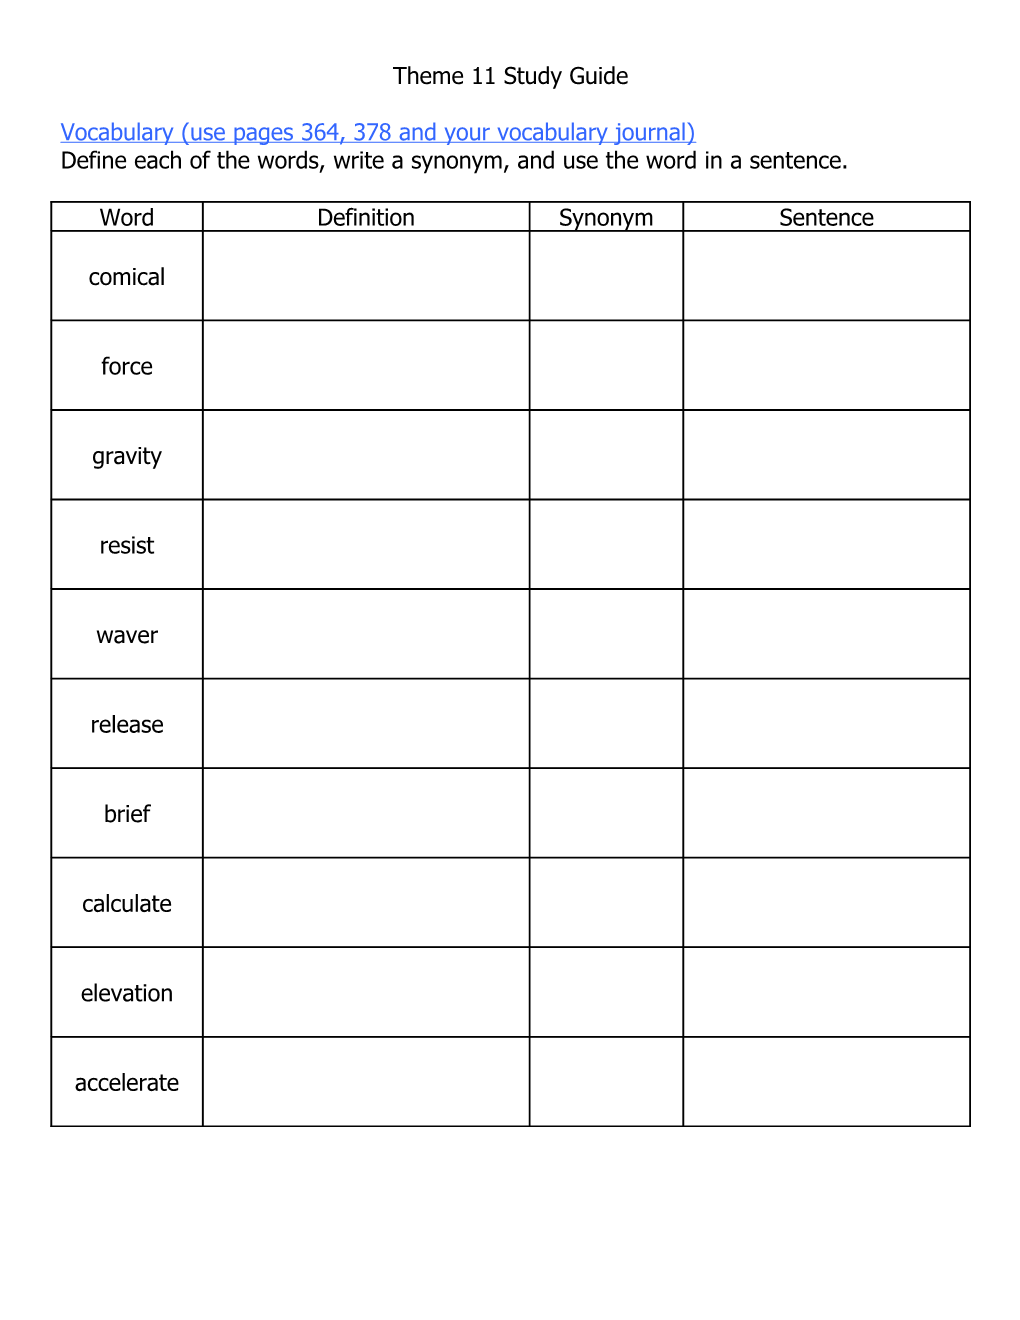 Vocabulary (Use Pages 364, 378 and Your Vocabulary Journal)